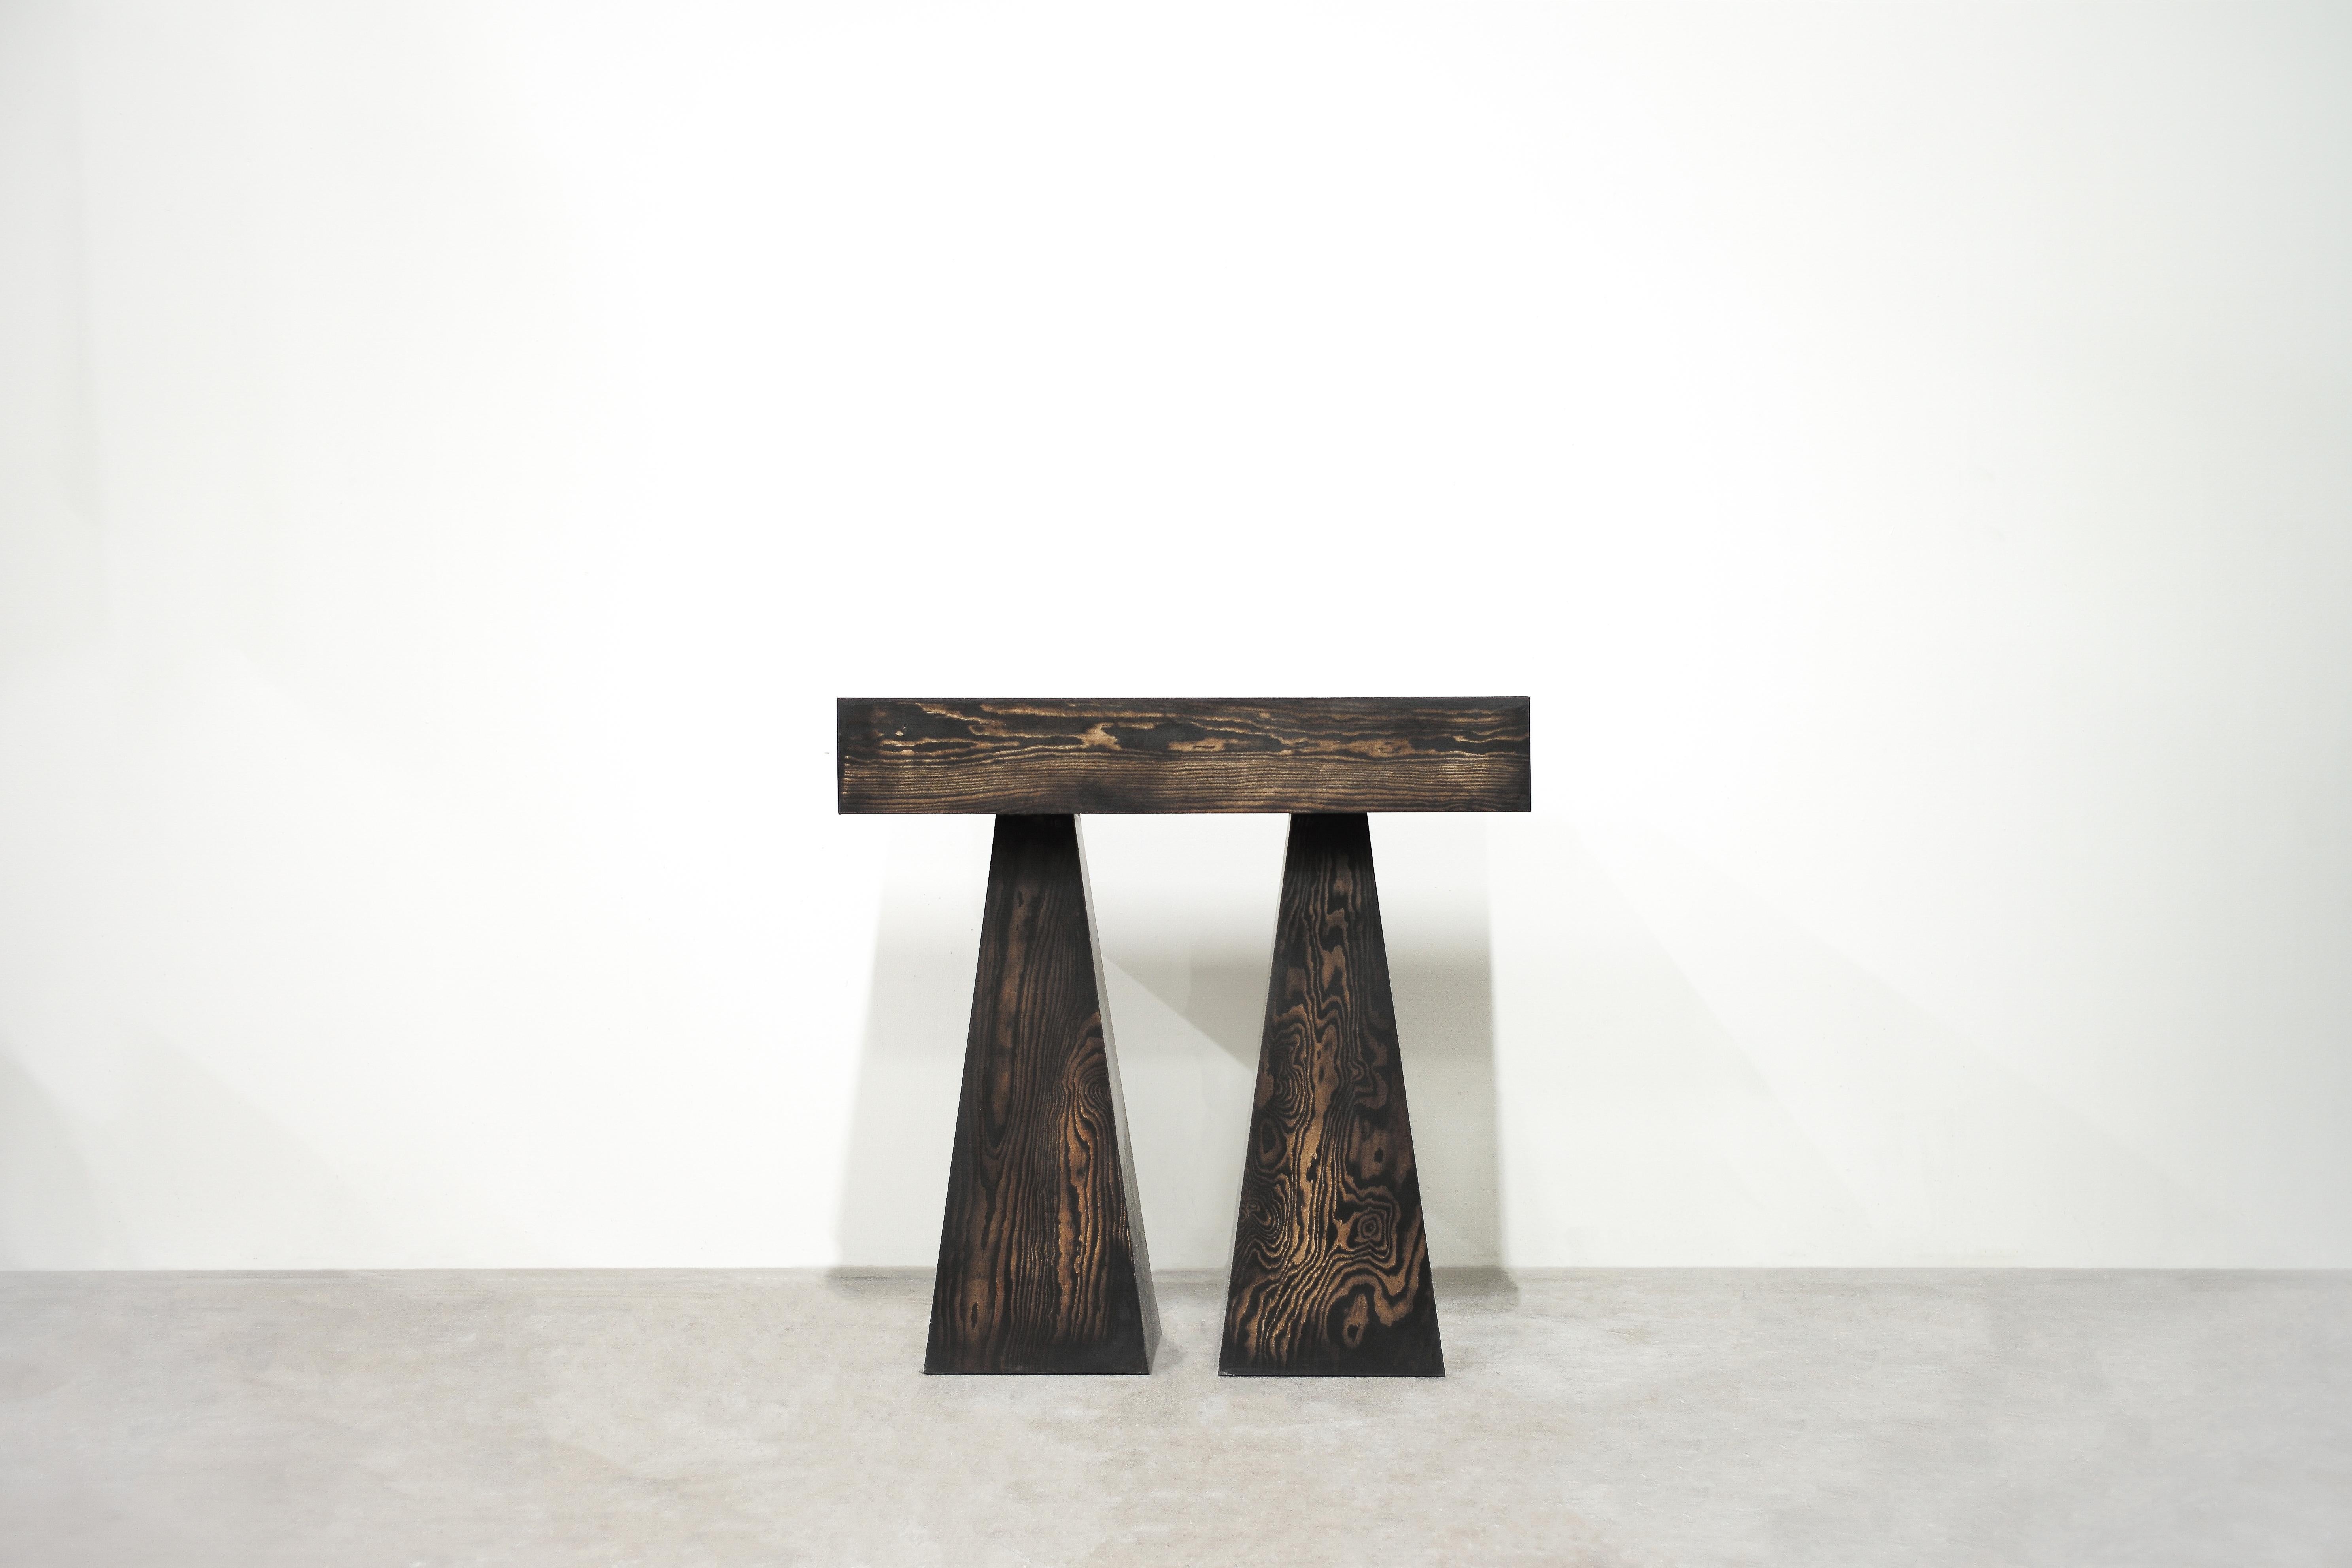 Torn console table in melange by Lucas Tyra Morten
2023
Limited Edition of 12
Dimensions: D 40 x W 90.5 x H 89 cm.
Material: Polished waxed plywood with pigmented linseed oil wax.

Torn table with its two individual legs symbolizes the constant